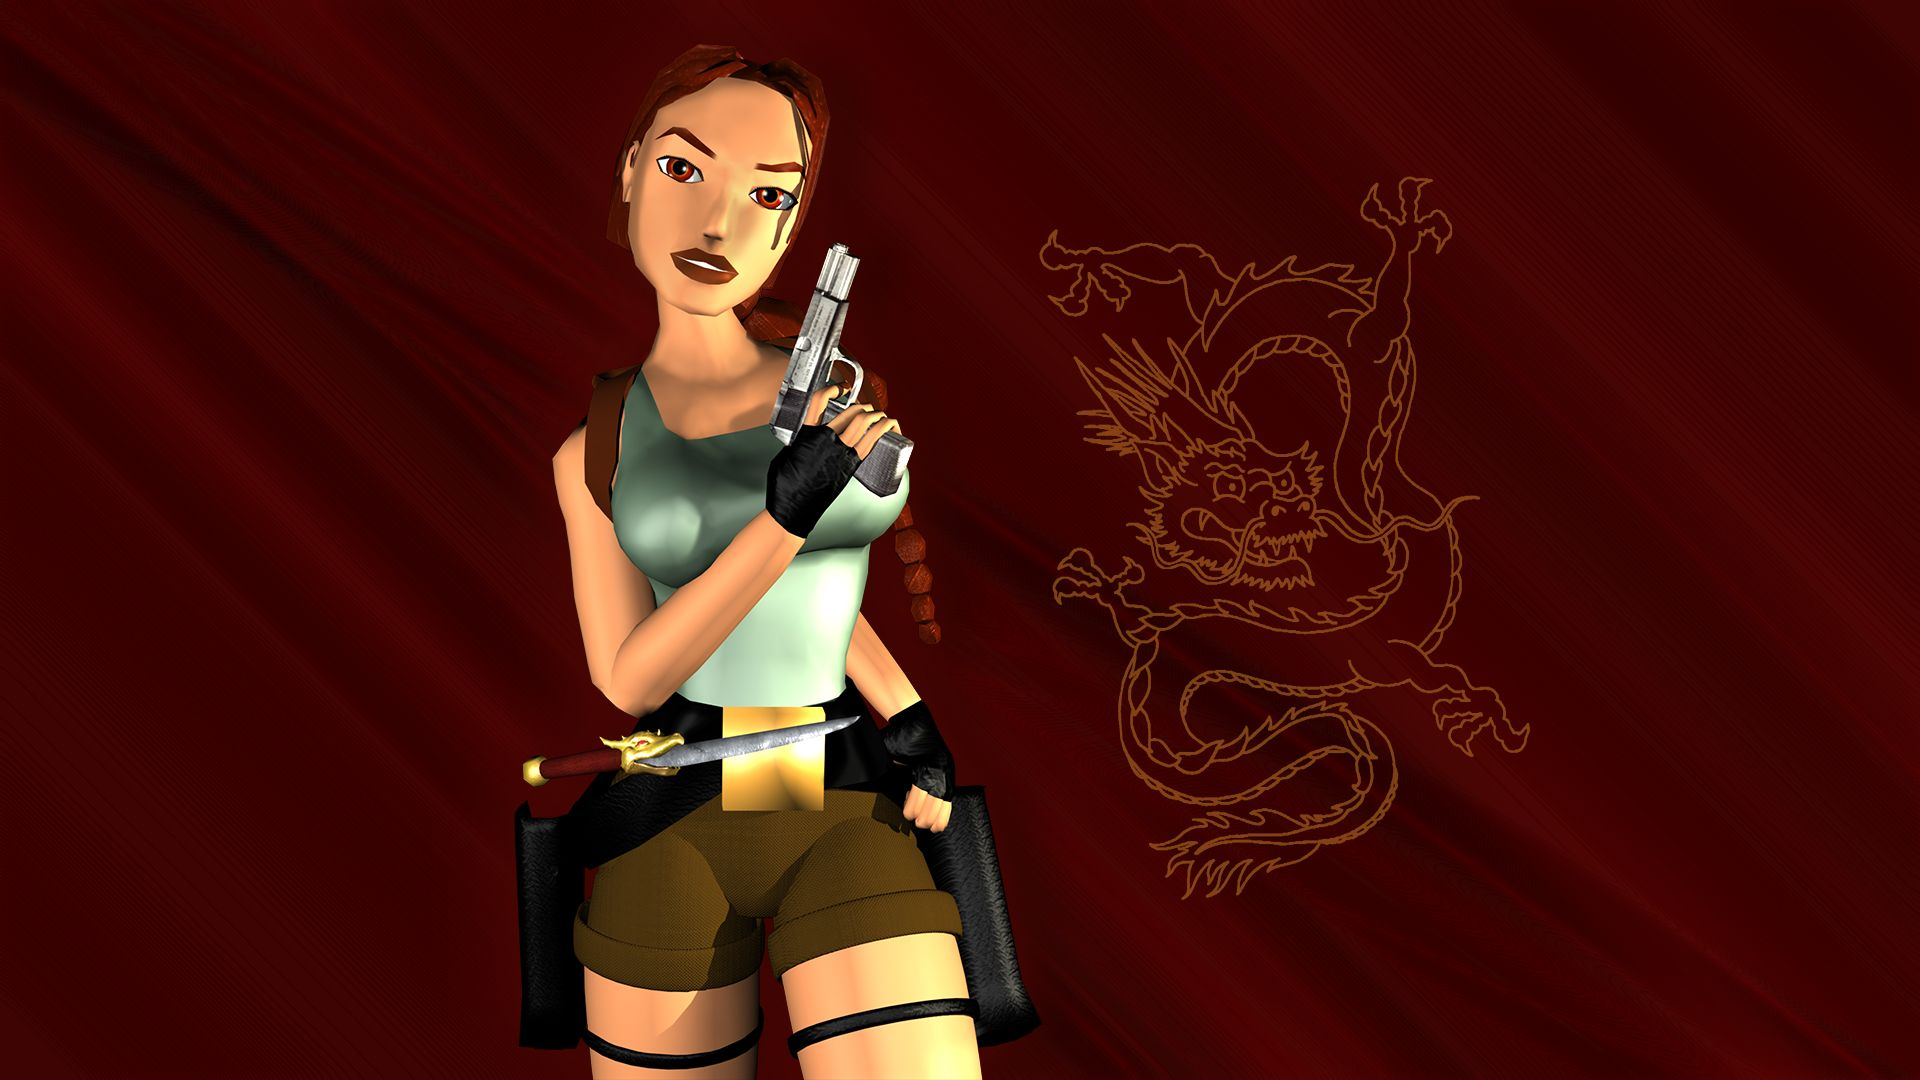 1920x1080 Tomb Raider 2 Wallpapers Top Free Tomb Raider 2 Backgrounds